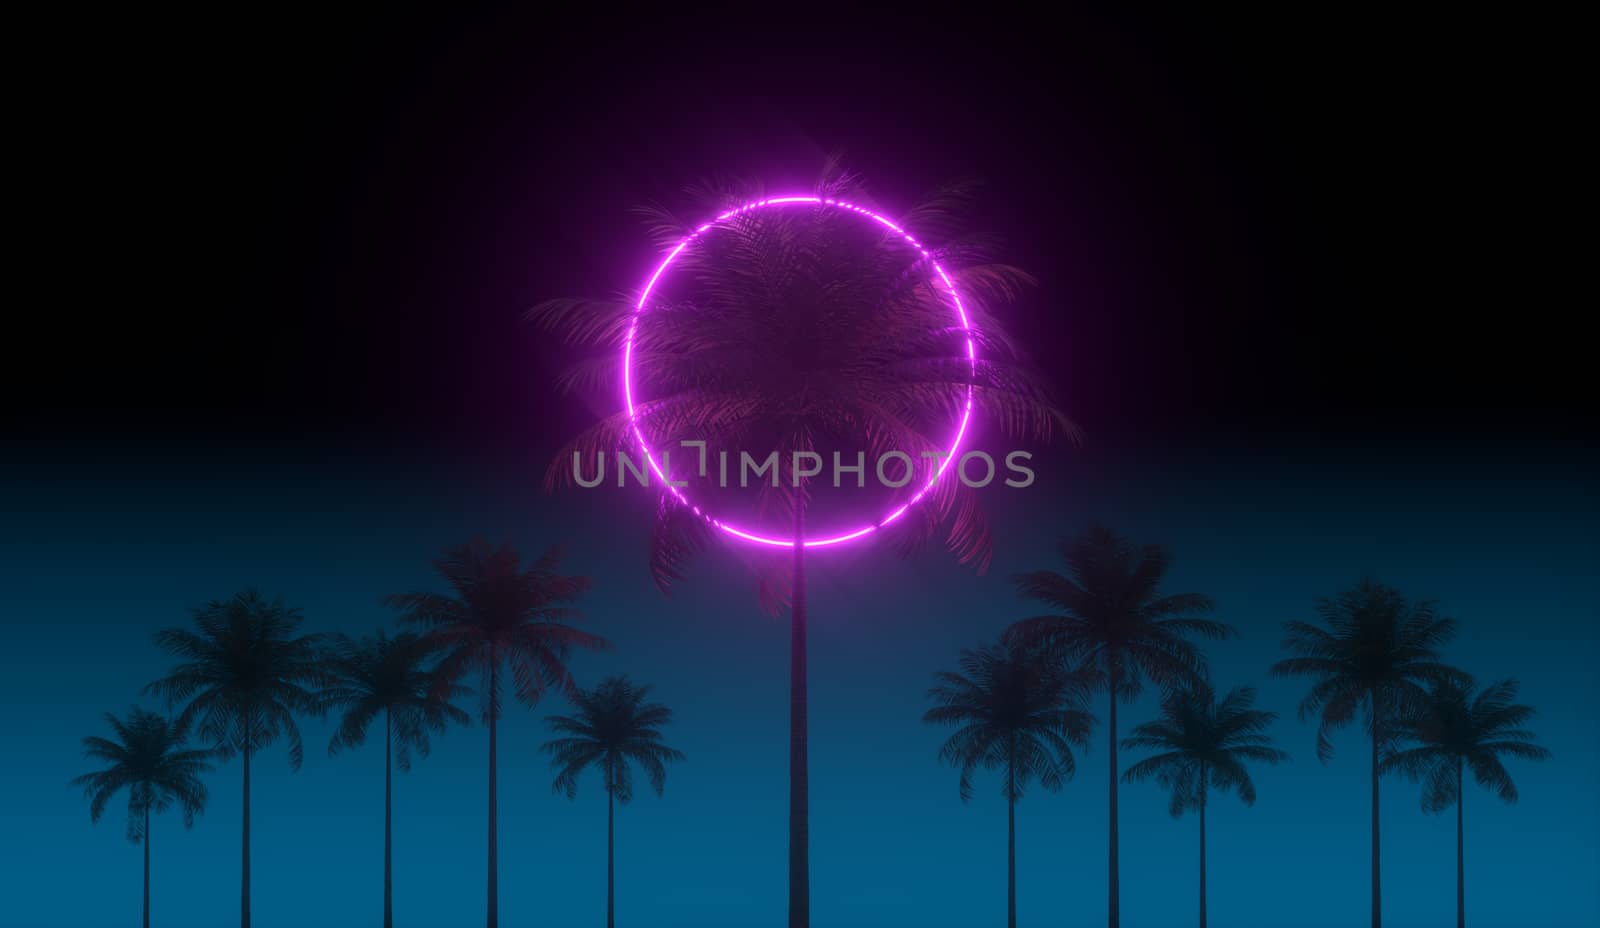 3D vaporwave render background with neon circle, palms and night blue sky. Synthwave 1980s rentowave illustration. Yesterday's tomorrow scene